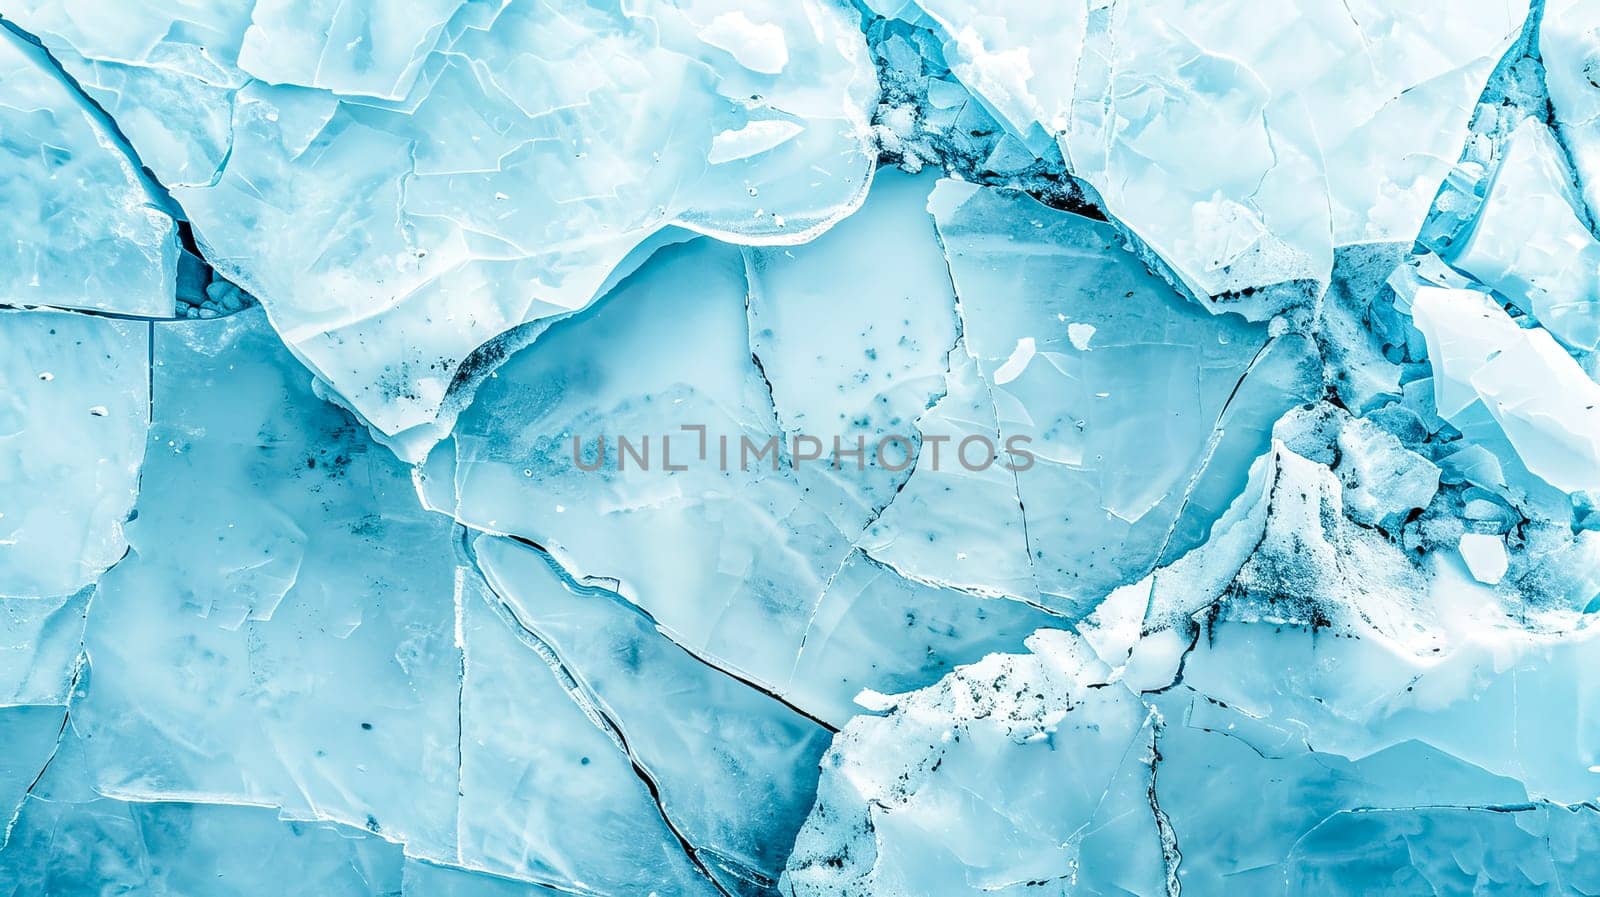 Fractured ice texture in cool blue tones by Edophoto